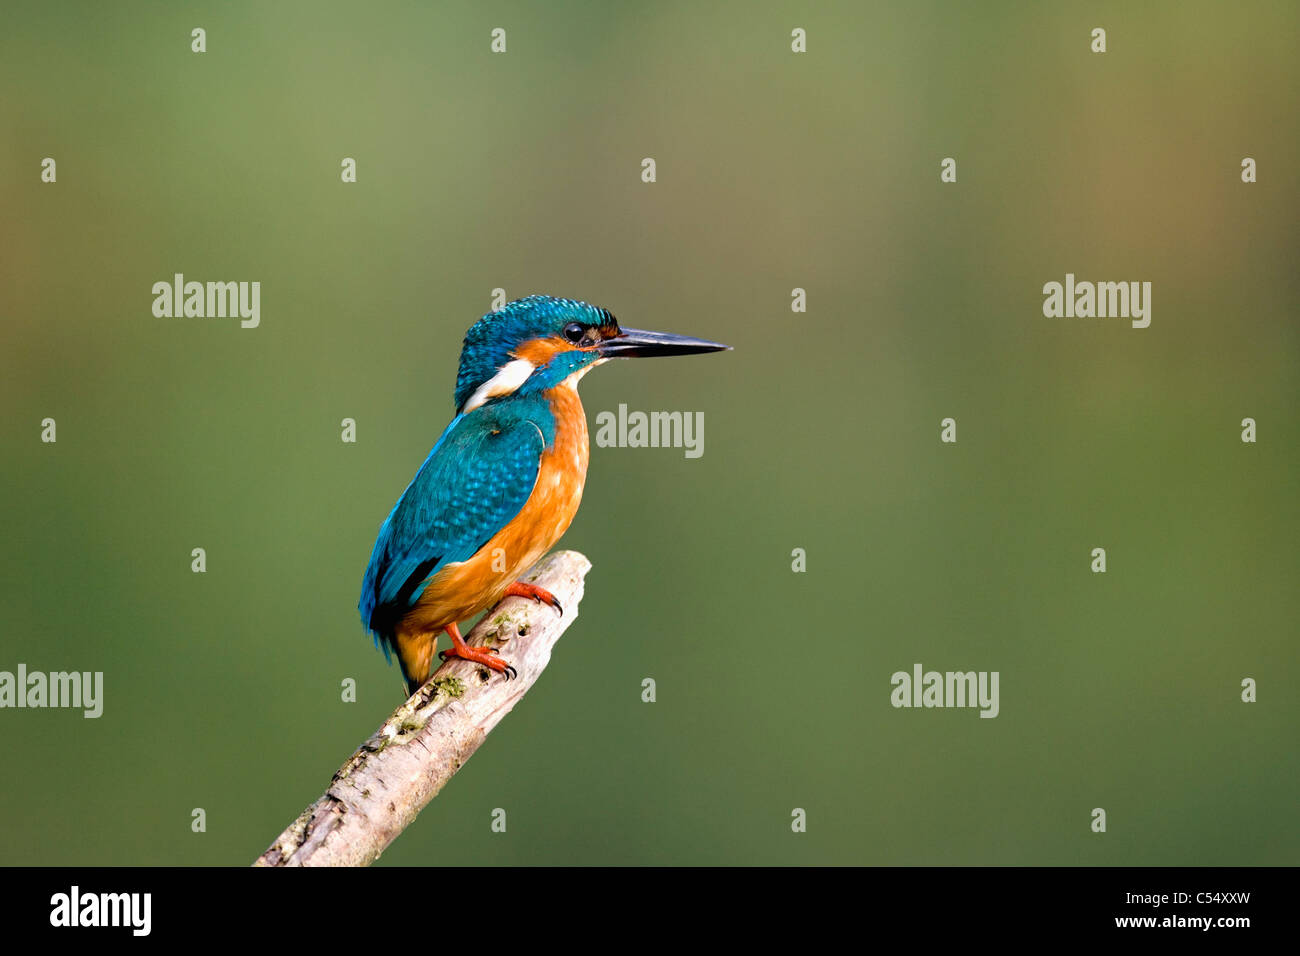 The Netherlands, Lelystad, National Park called Oostvaarders Plassen. Common Kingfisher perched on branch. ( Alcedo atthis ) Stock Photo